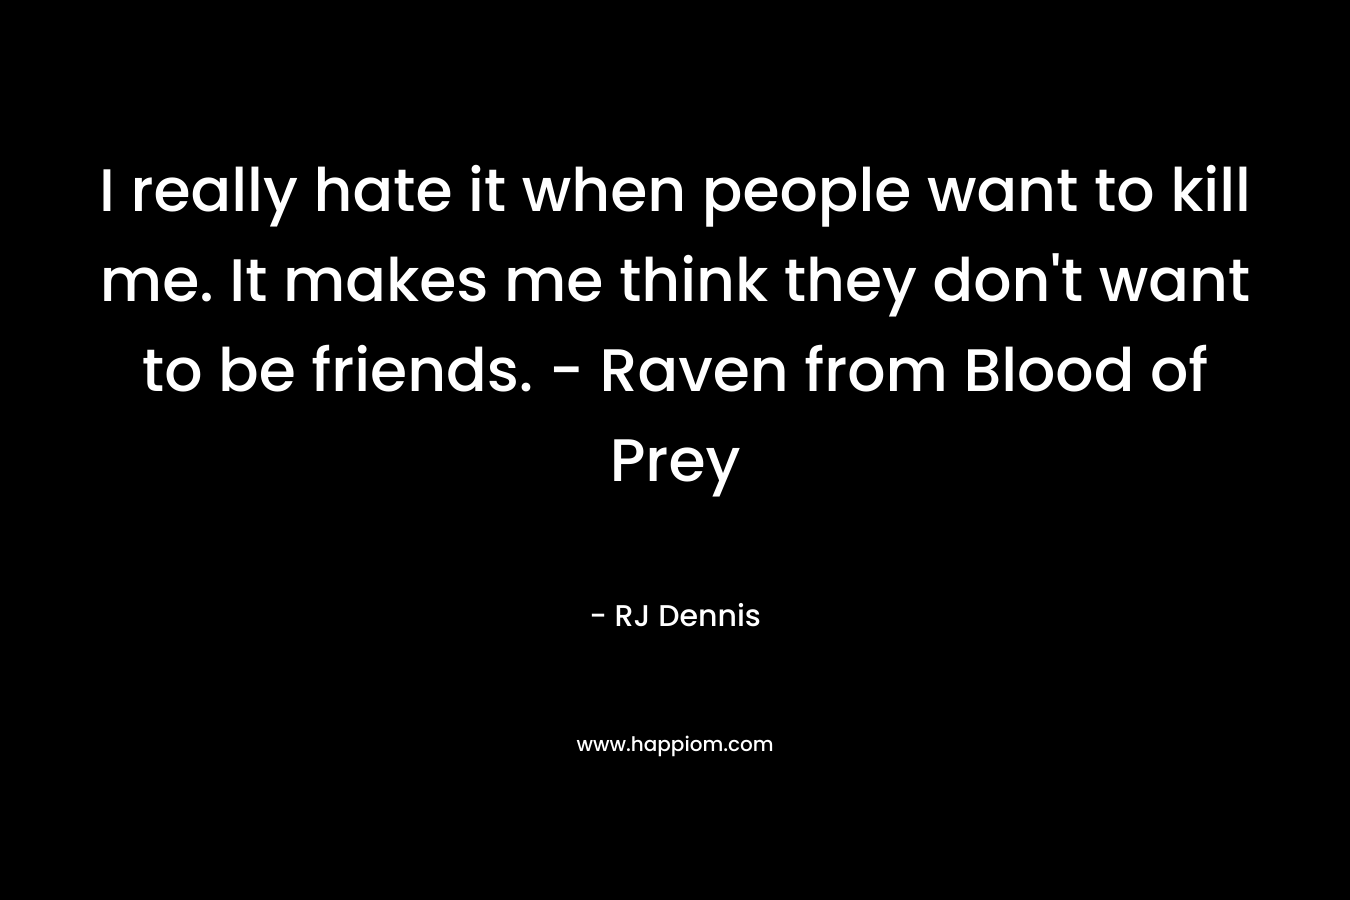 I really hate it when people want to kill me. It makes me think they don't want to be friends. - Raven from Blood of Prey